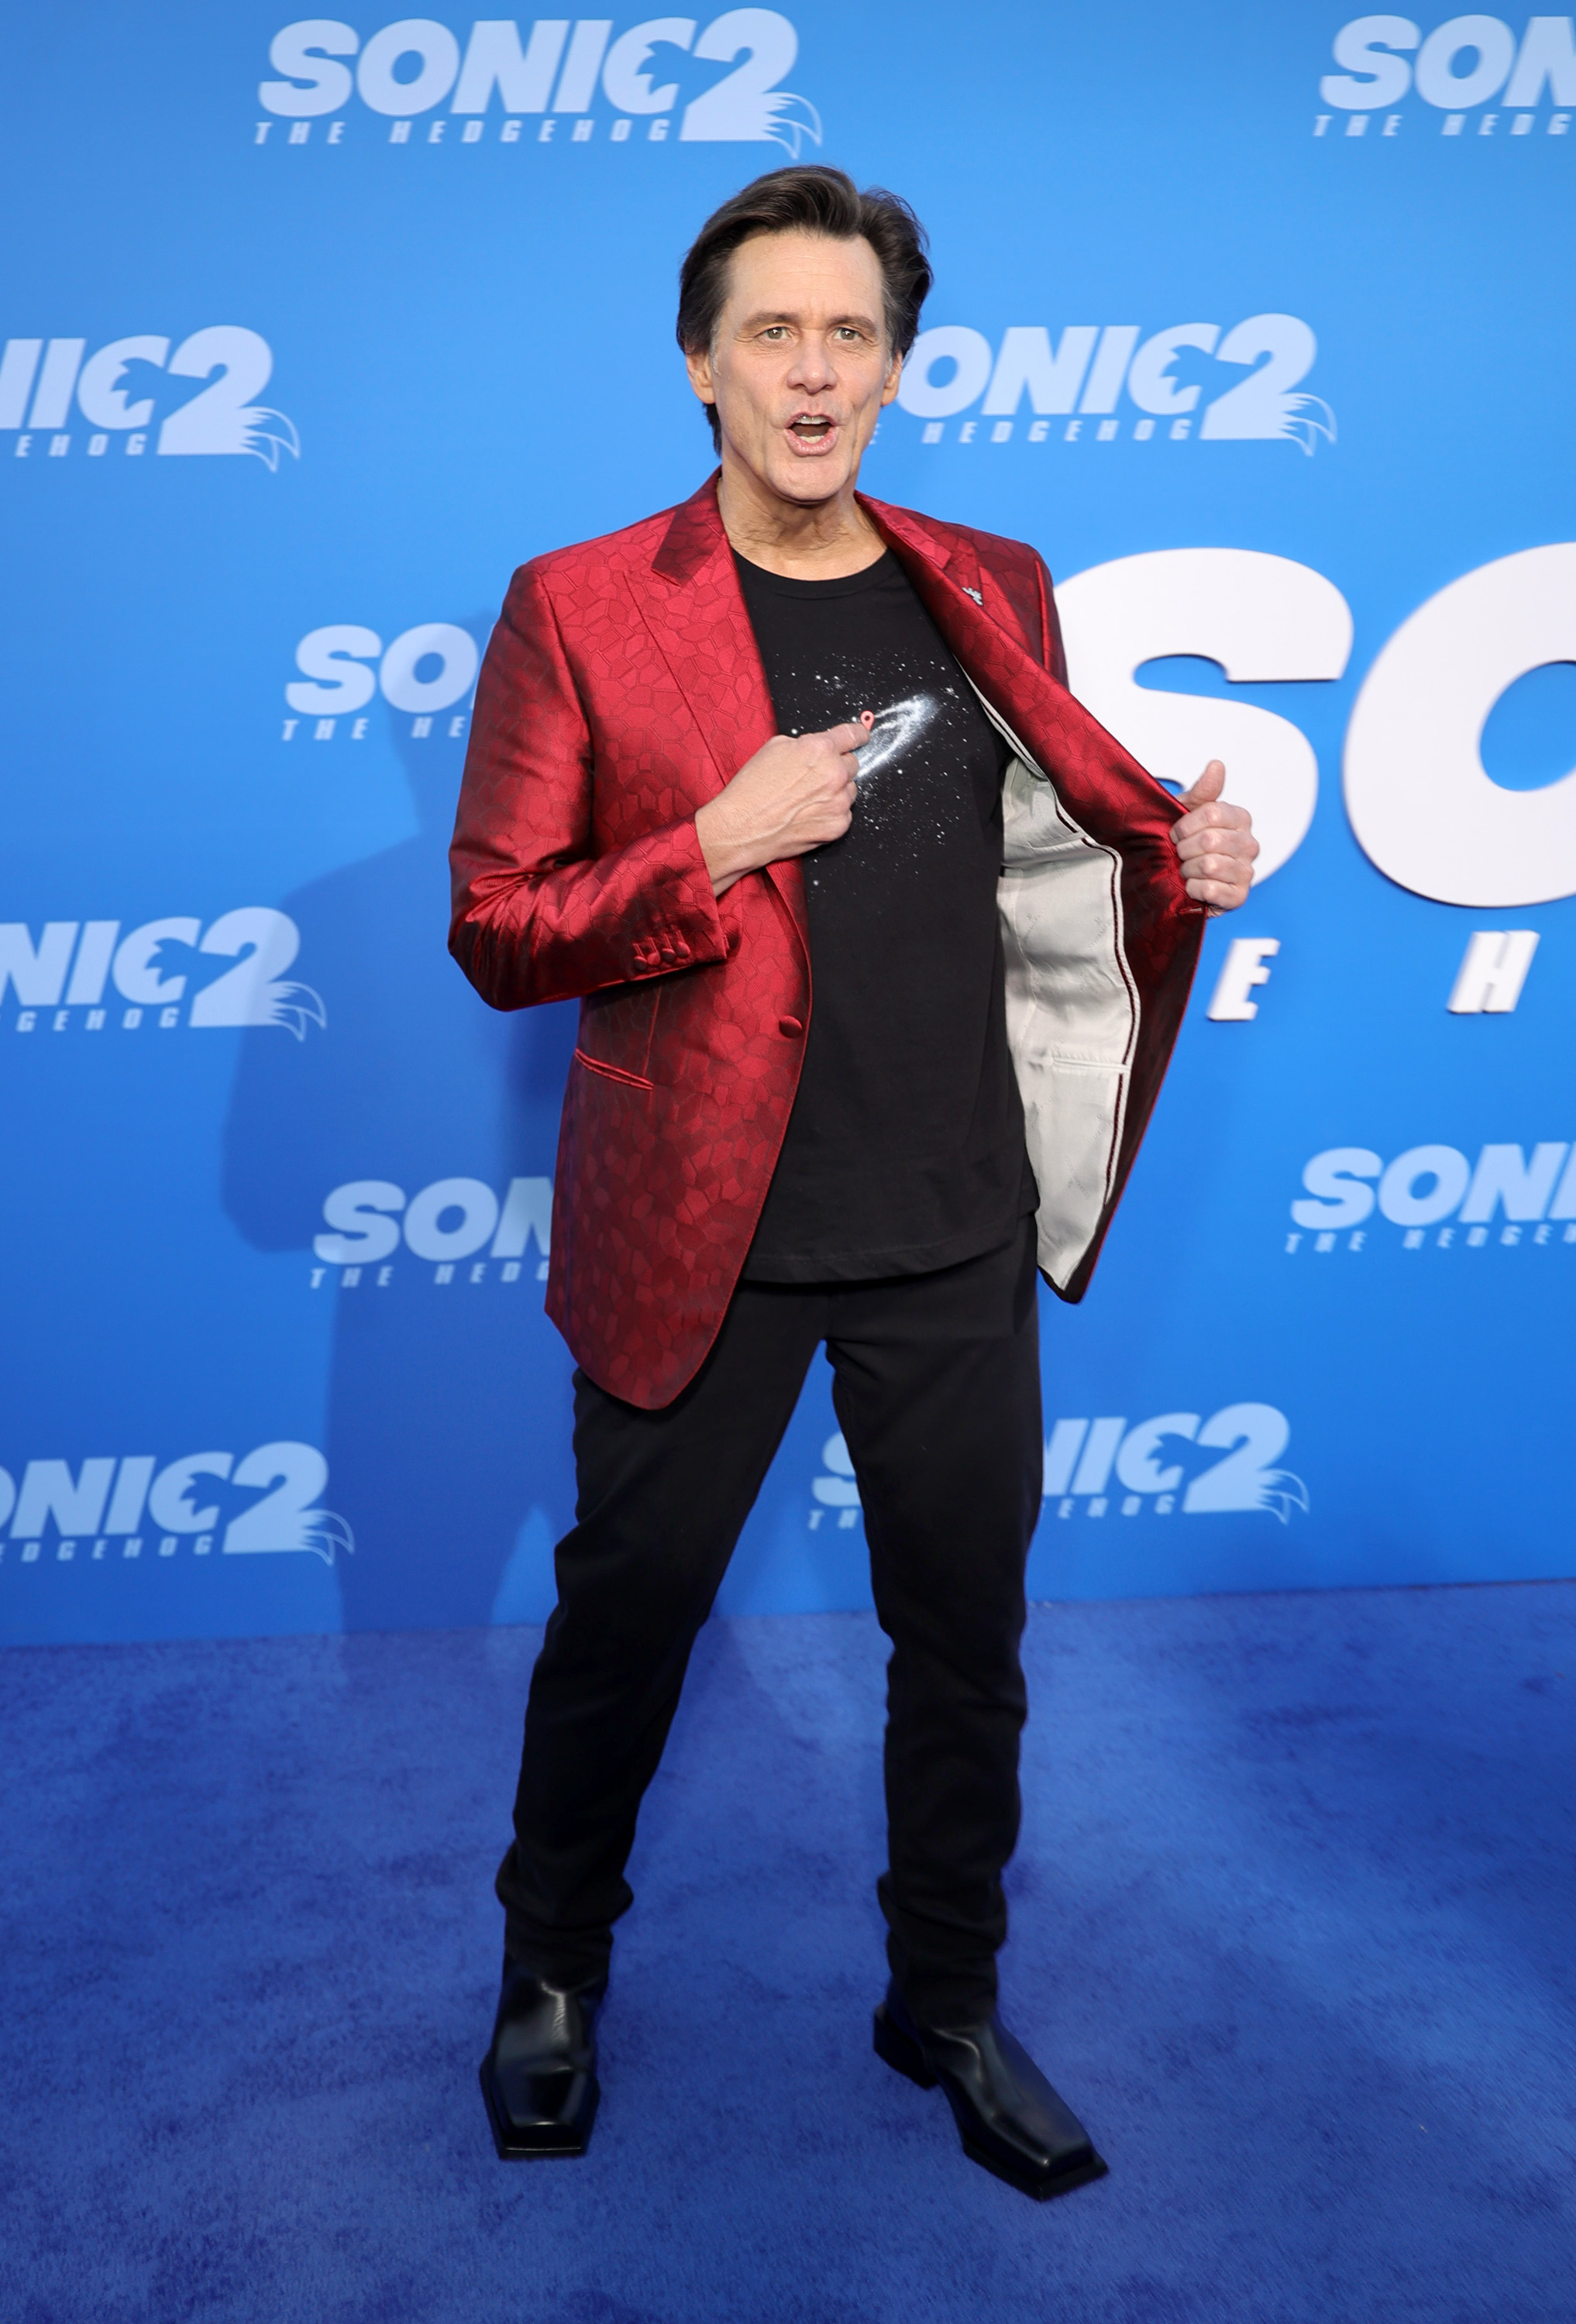 Jim Carrey at the screening premiere of "Sonic the Hedgehog 2" in Los Angeles, California on April 5, 2022 | Source: Getty Images